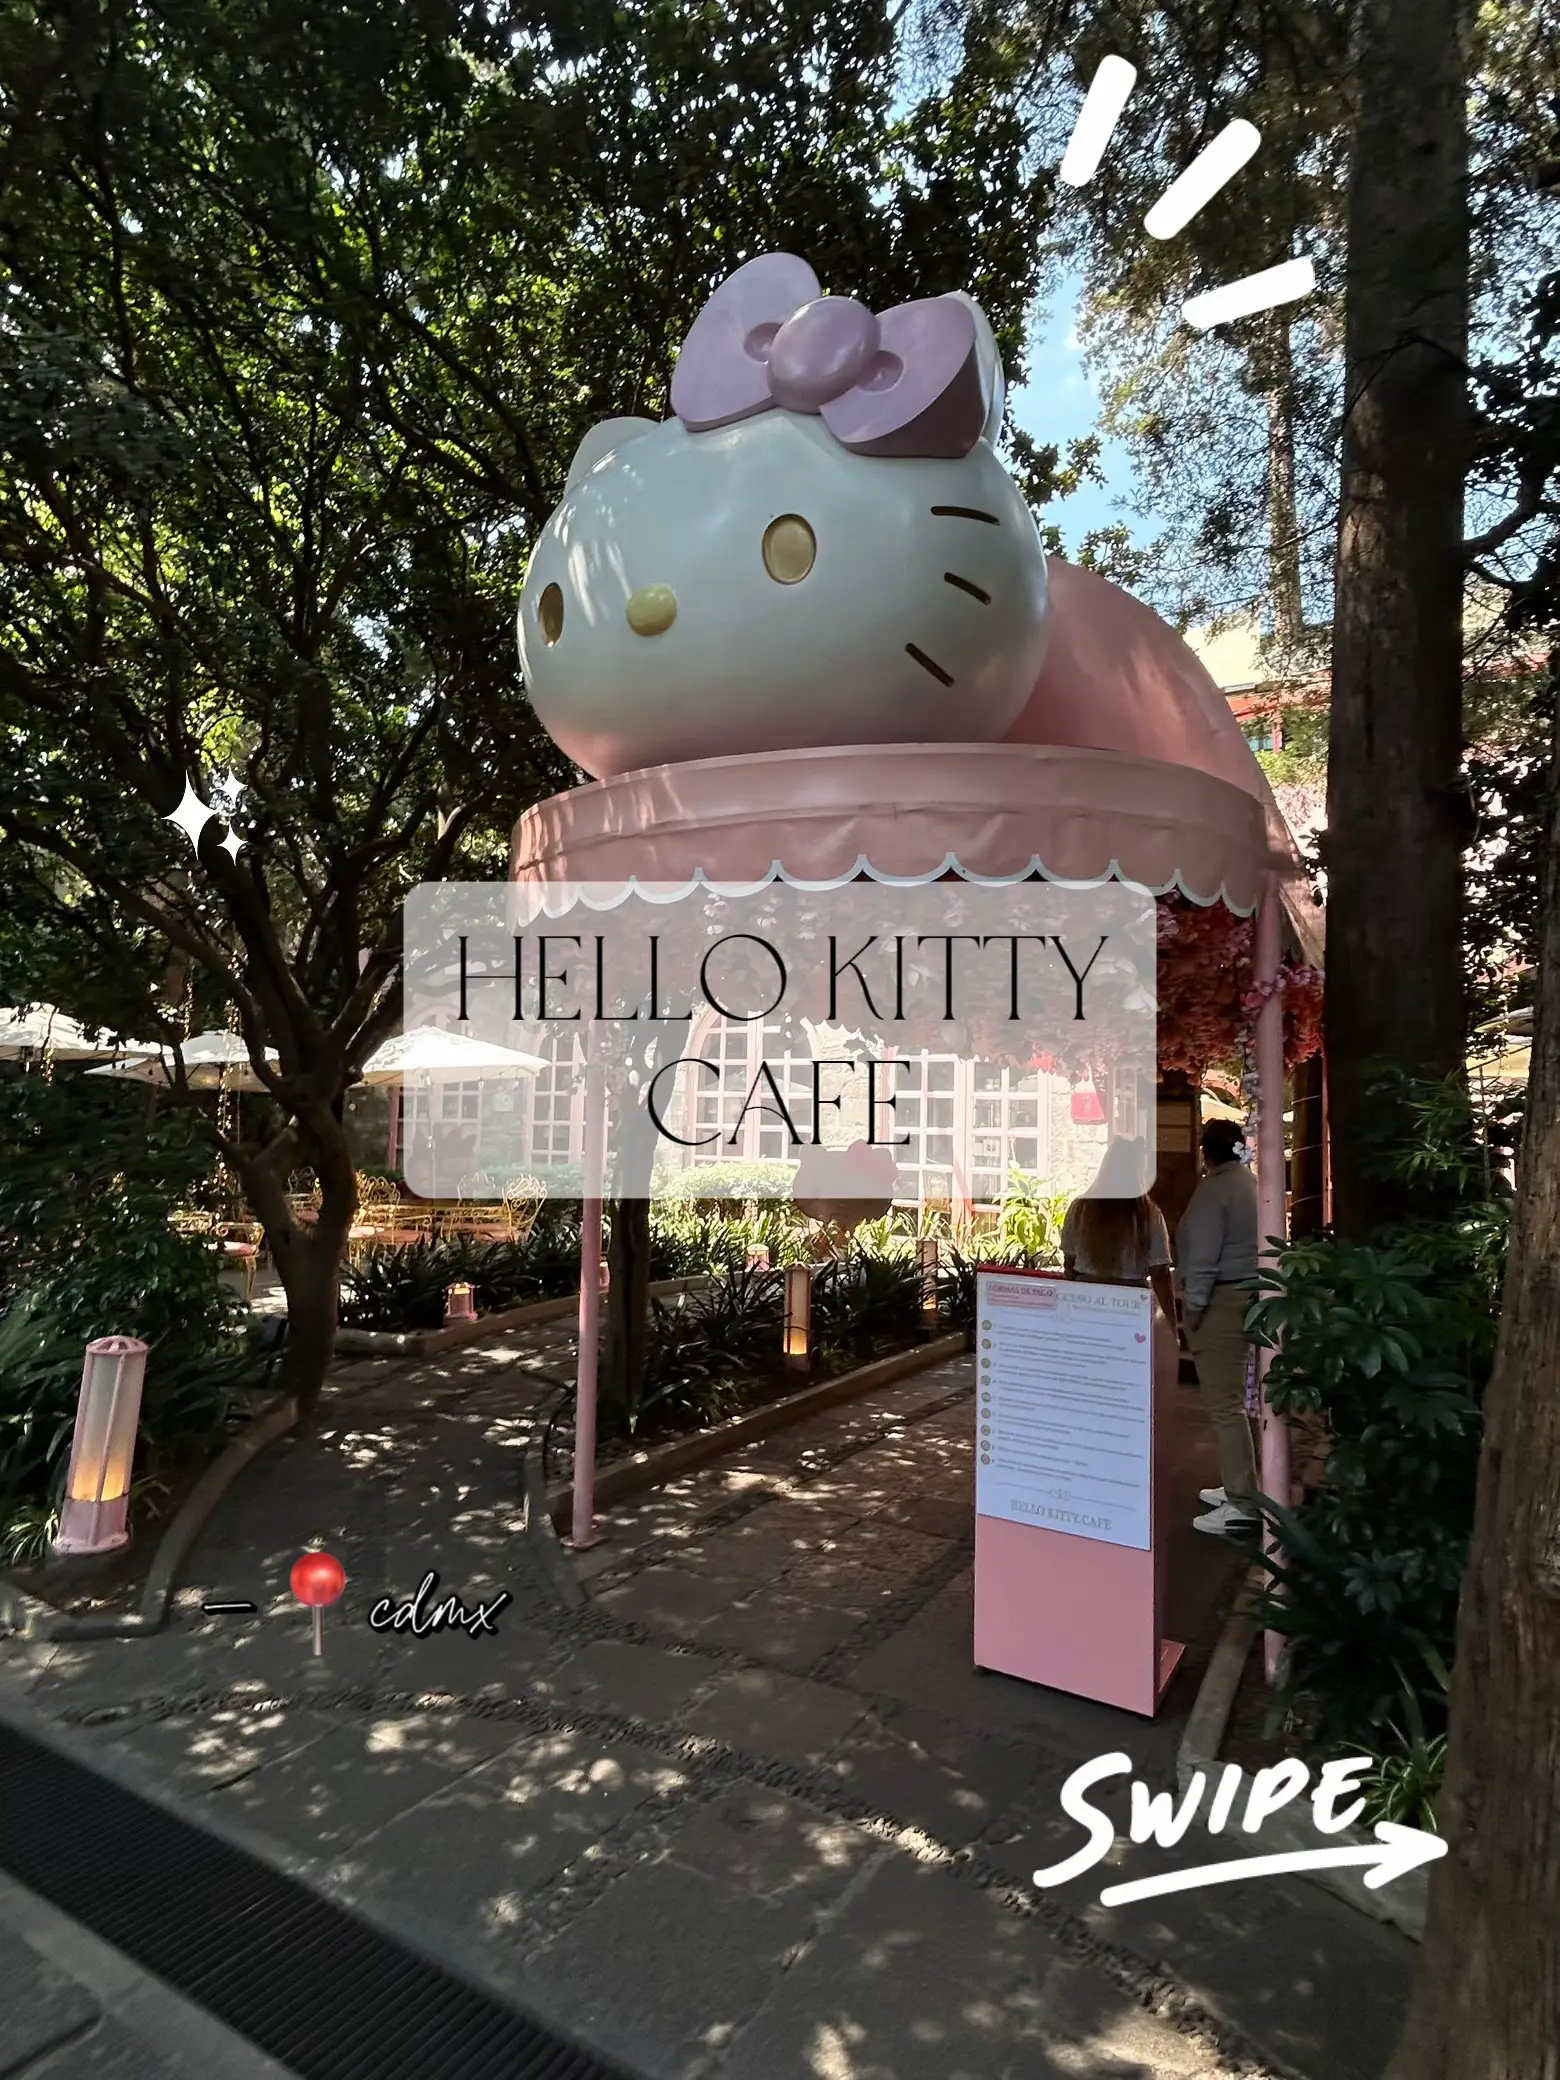 When in Vegas we hello kitty!!! #hellokittycafe, Gallery posted by Jewels